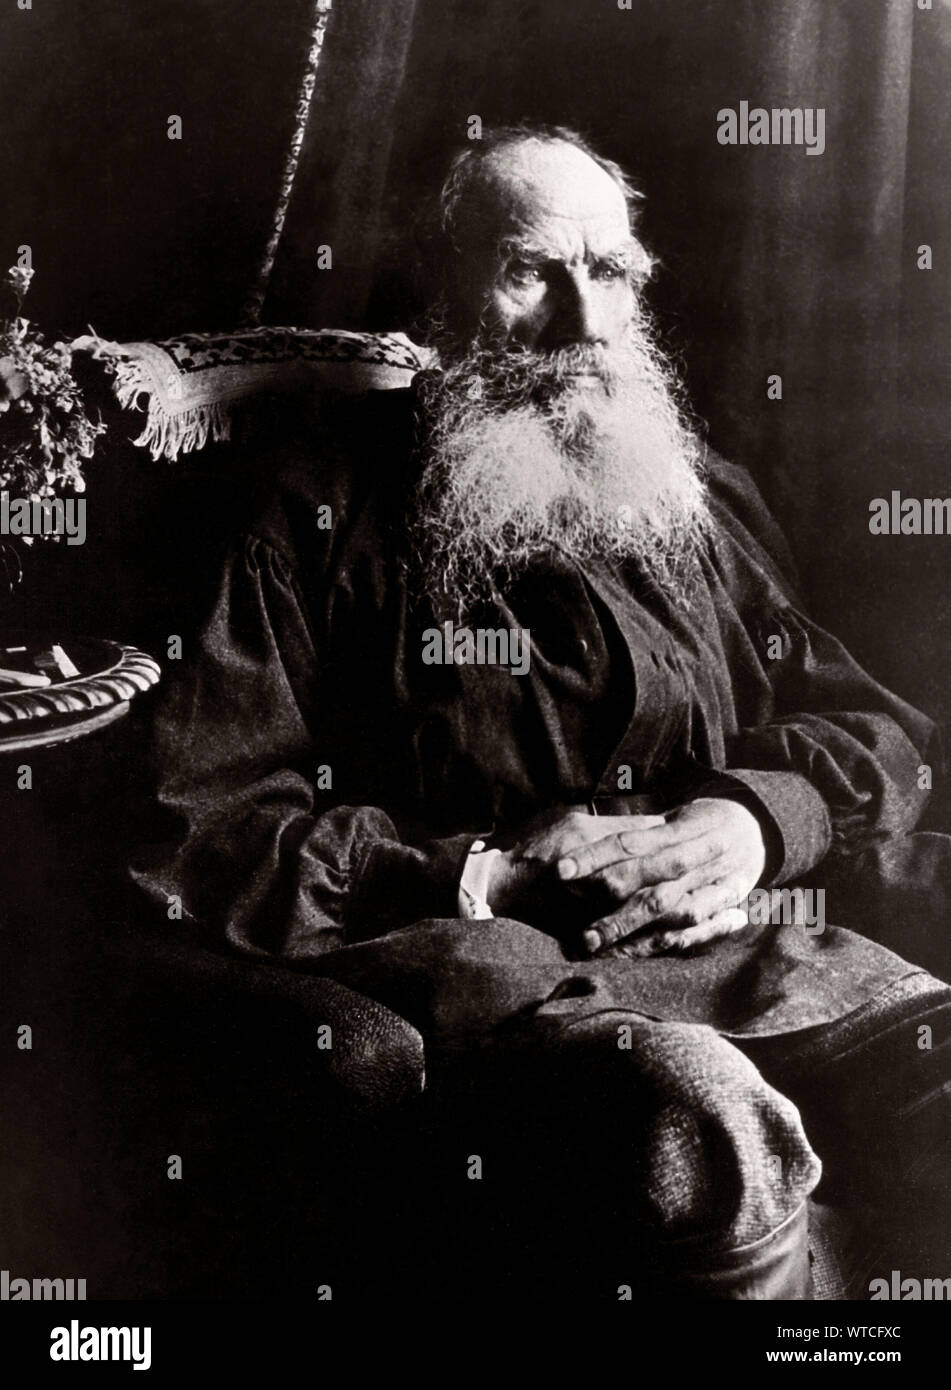 Count Leo Tolstoy (1828 – 1910) was a Russian writer who is regarded as one of the greatest authors of all time. He received multiple nominations for Stock Photo